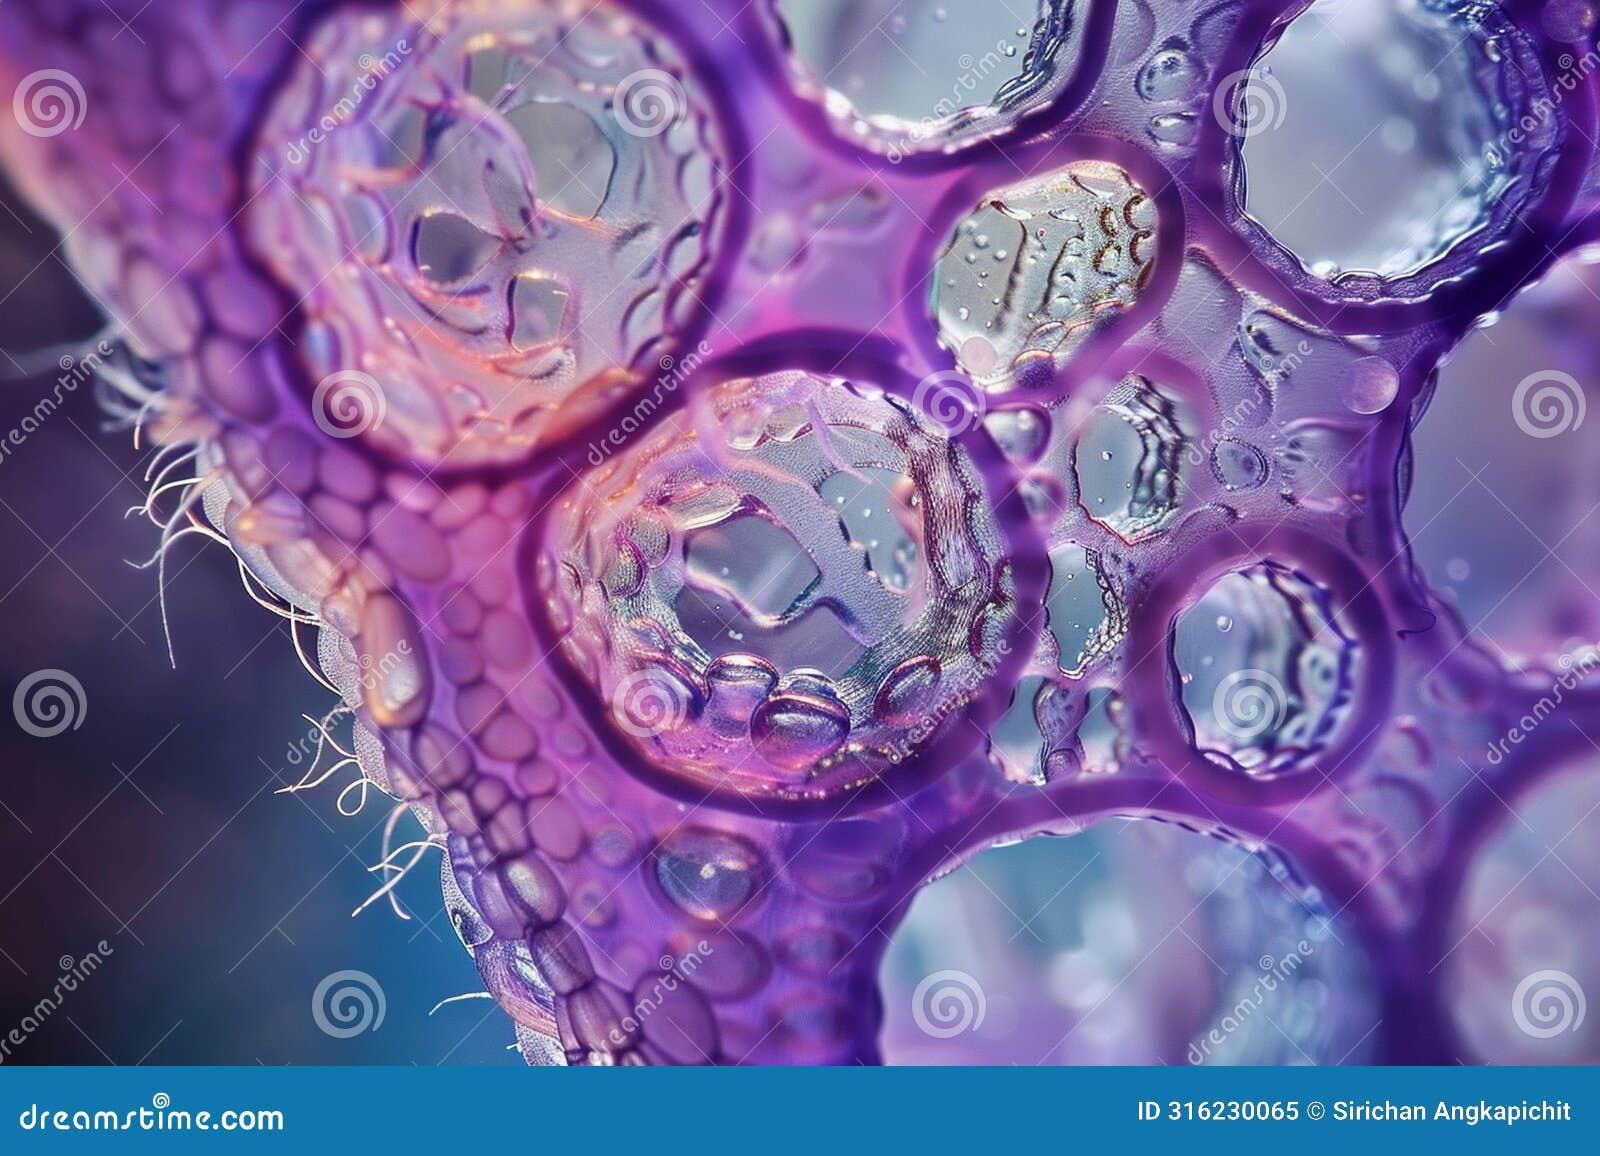 an onion cell under the microscope shows the typical plant cell features, detailed and precise